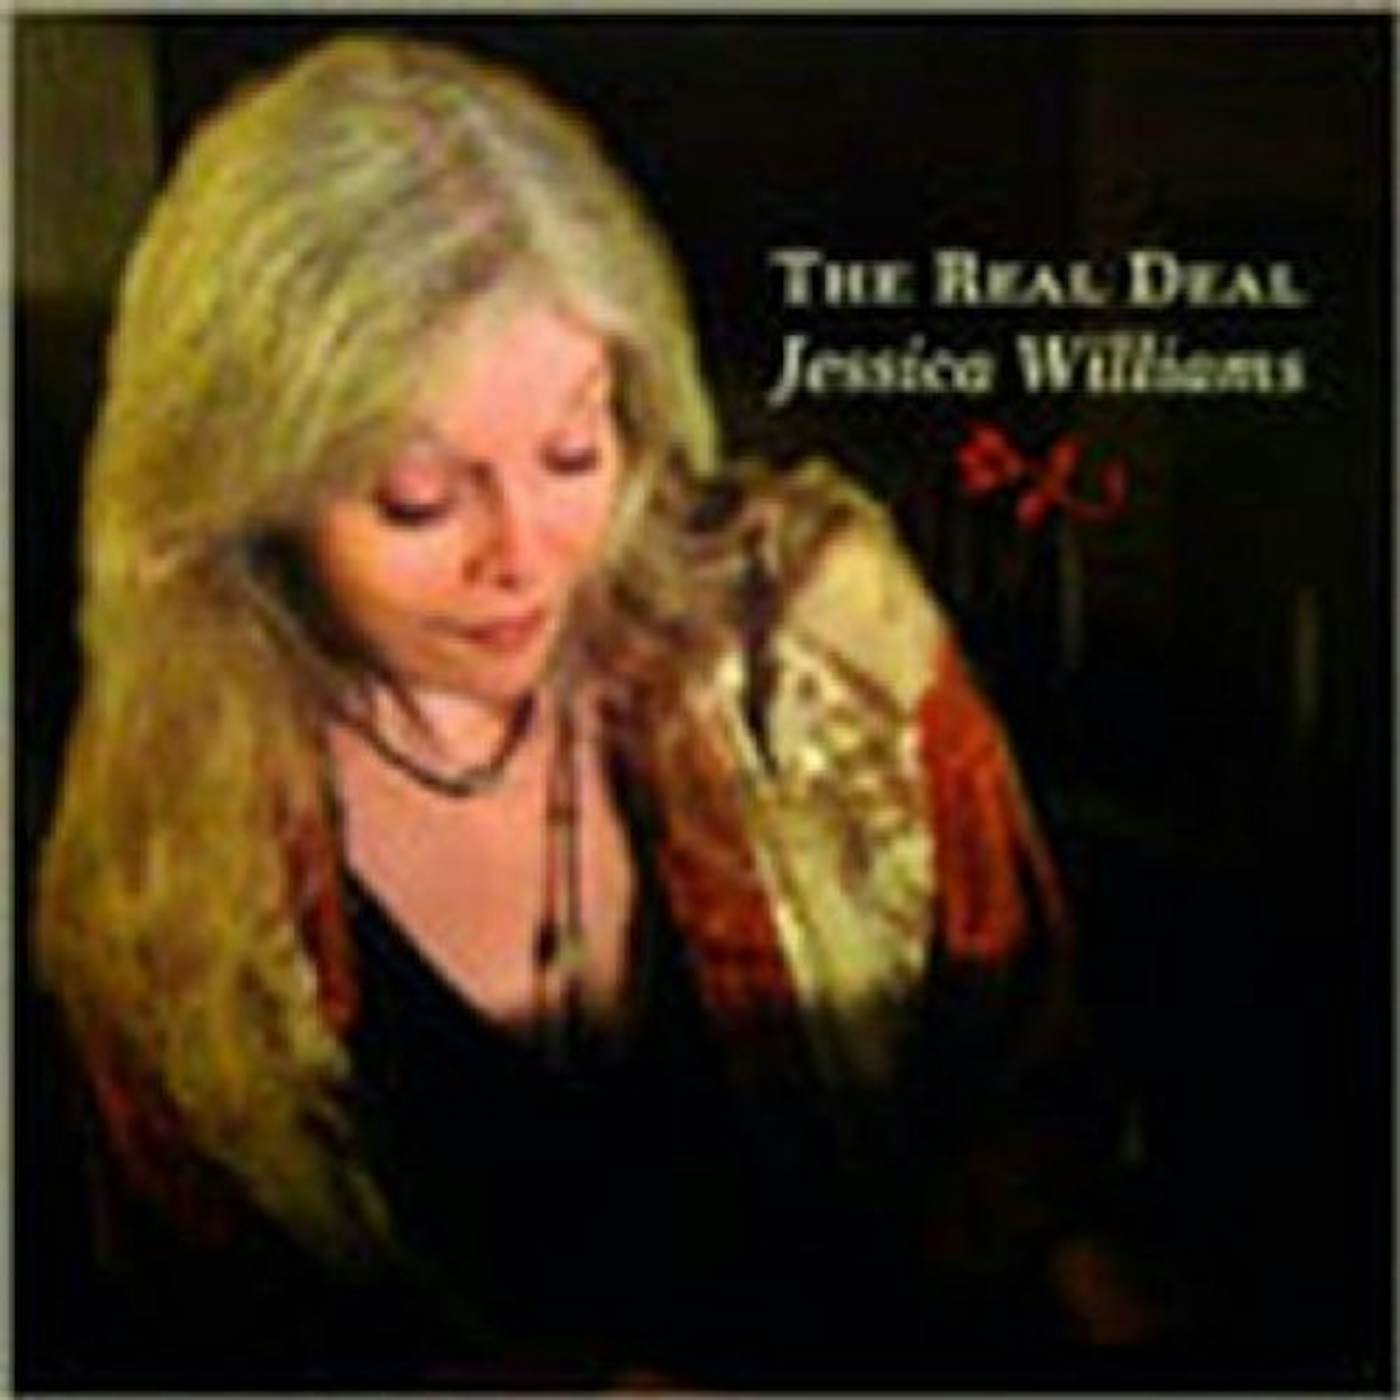 Jessica Williams REAL DEAL CD